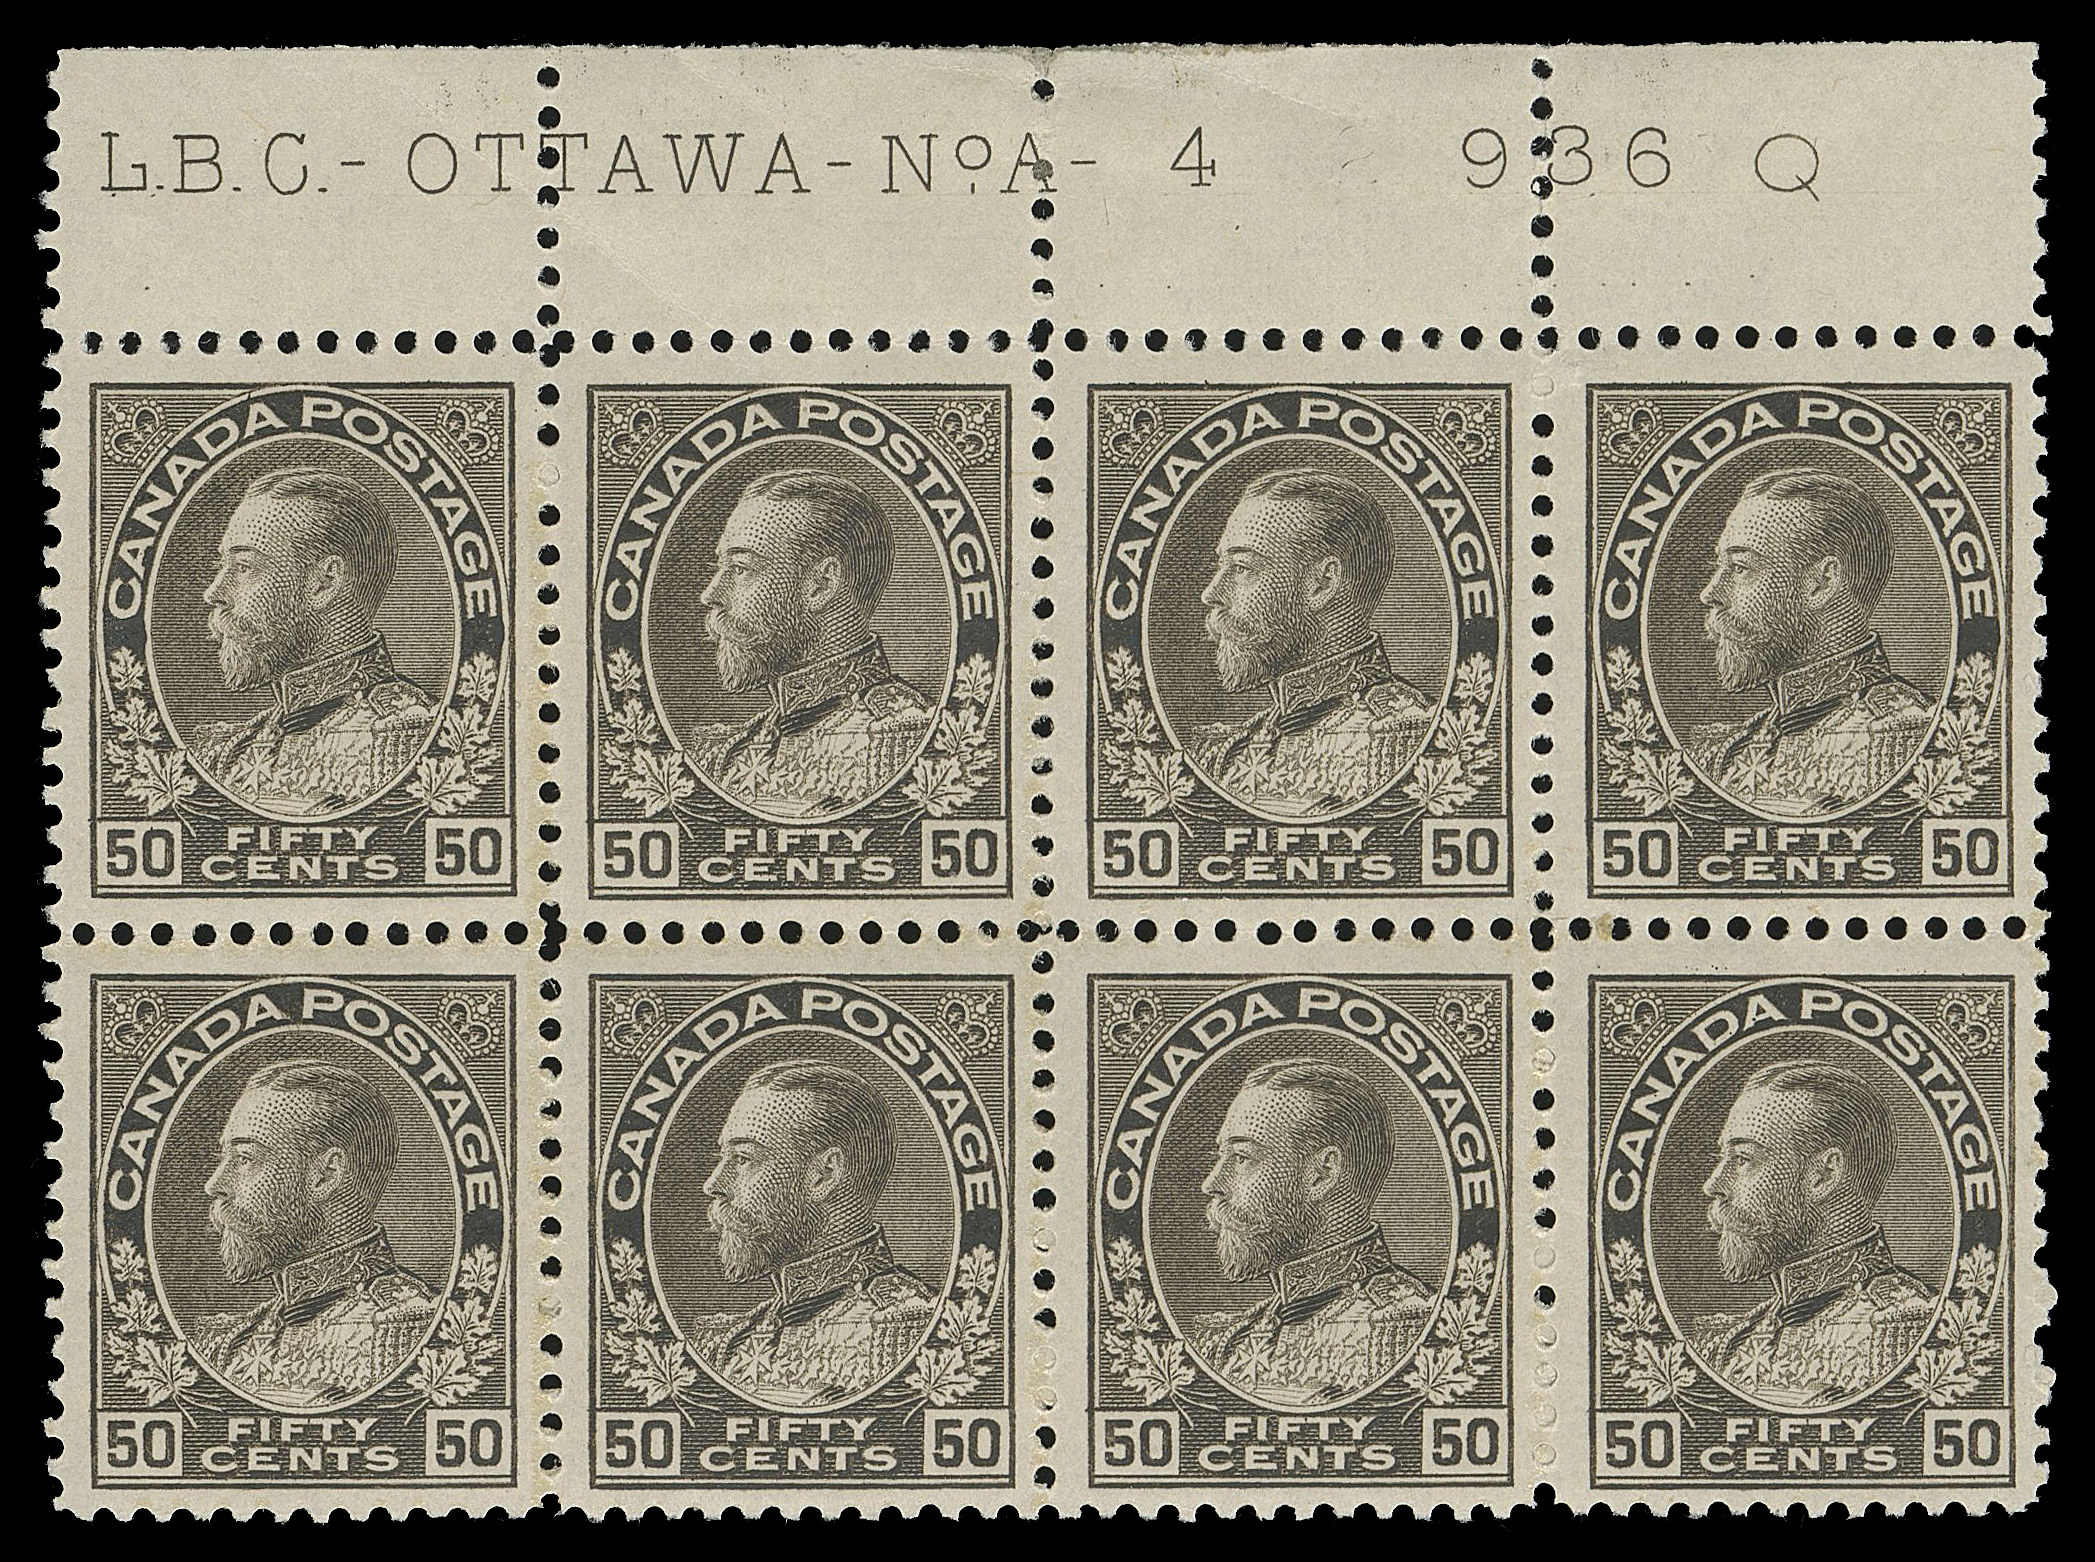 ADMIRAL STAMPS  120,A well centered Plate 4 block of eight with complete imprint and printing order number "936Q"; the re-engraved die showing redrawn framelines associated with the Plate 4 dry printing - a subject of controversy as it was described as "wet printing" and "unique" in "The Admiral Gold Medal Collection" (Robert Bayes Collection), Capex 